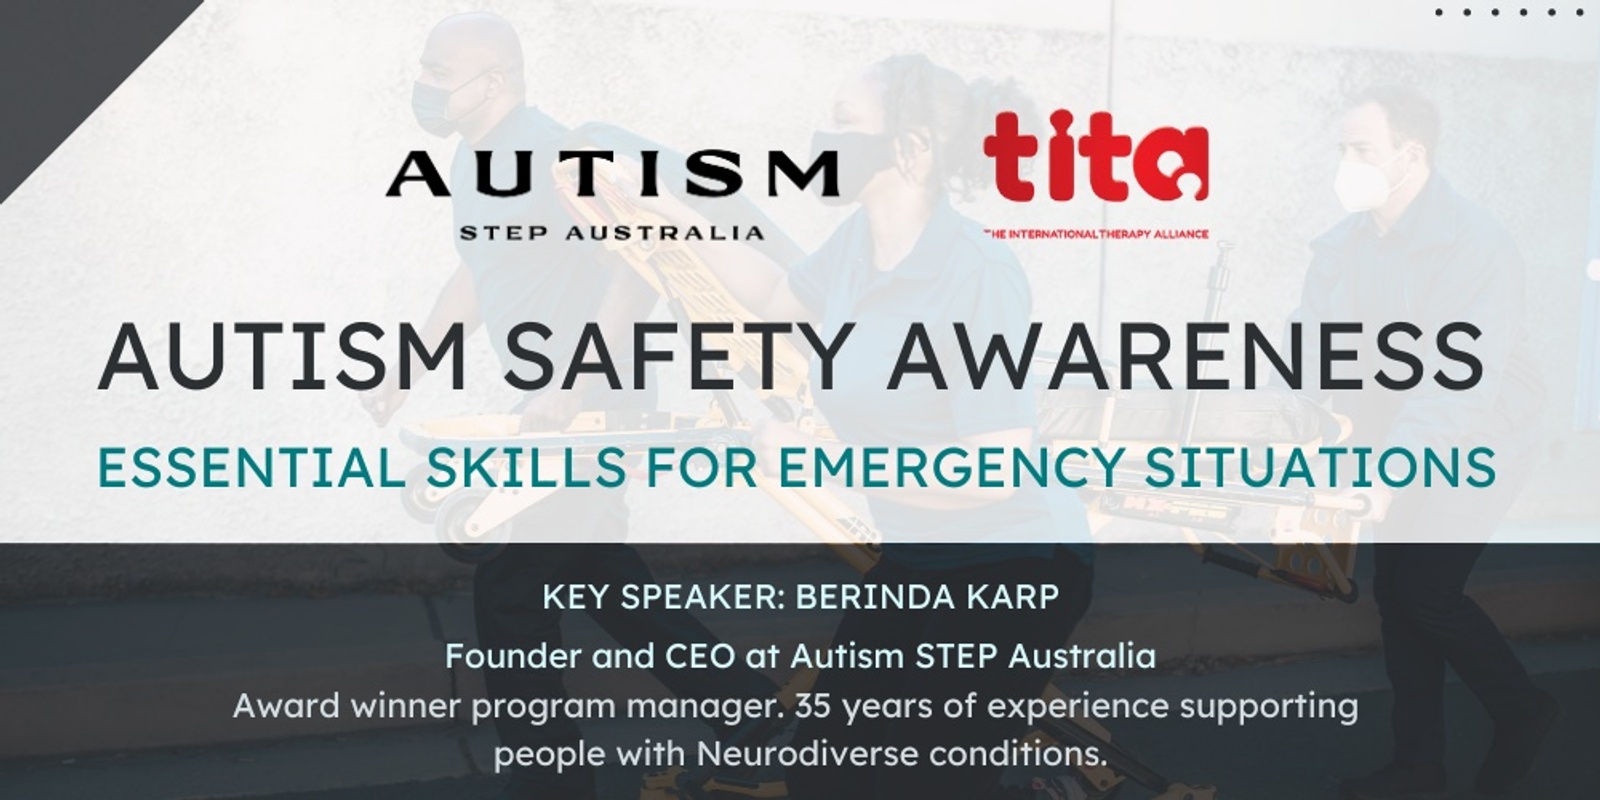 Autism Safety Awareness Essential Skills For Emergency Situations